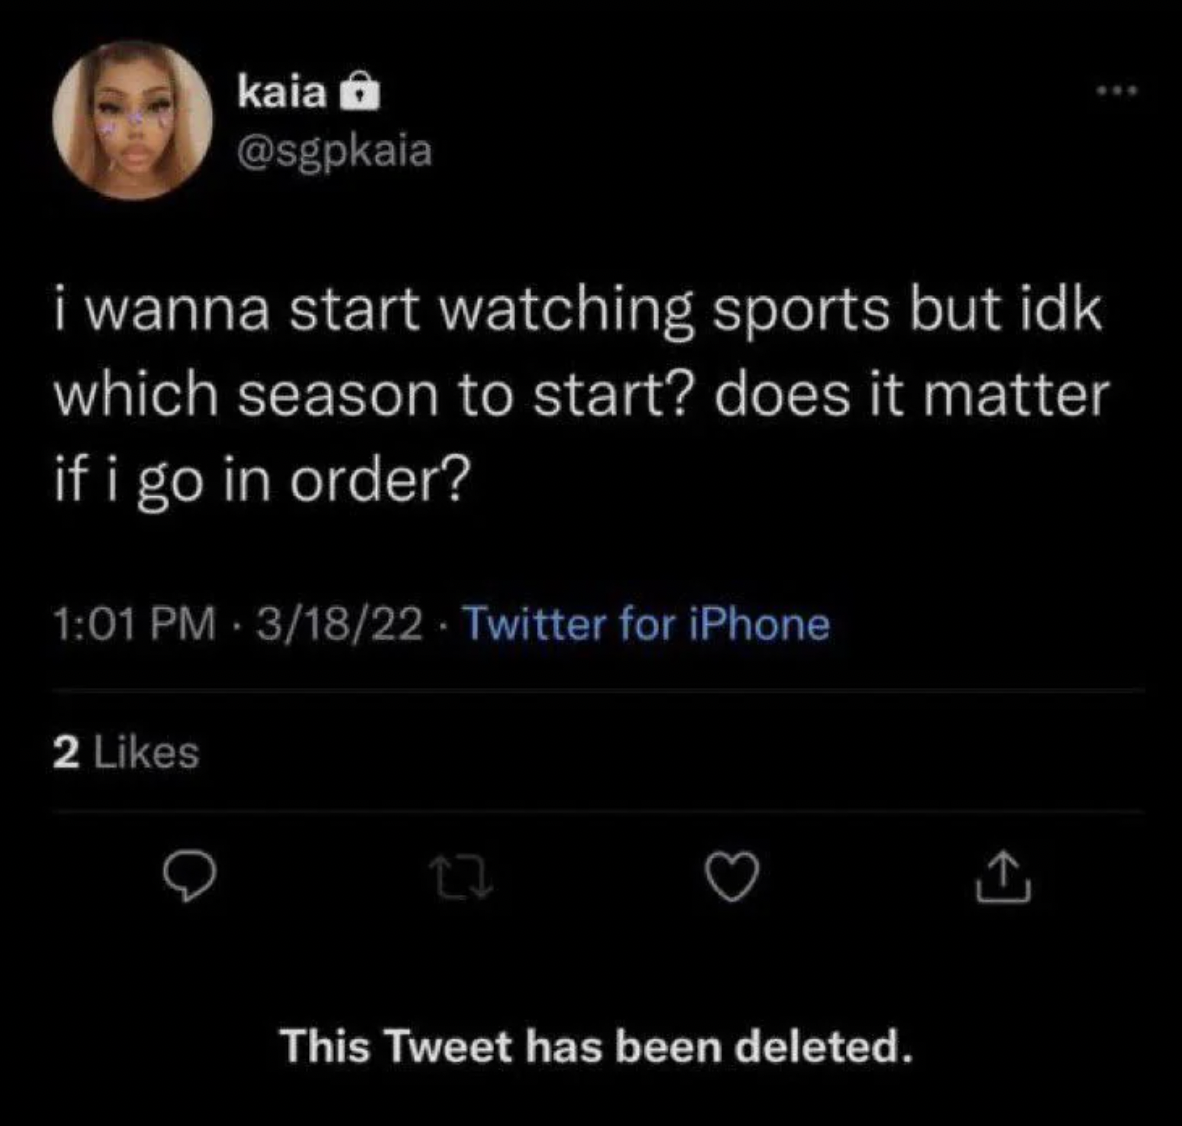 screenshot - kaia i wanna start watching sports but idk which season to start? does it matter if i go in order? 31822 Twitter for iPhone 2 This Tweet has been deleted.